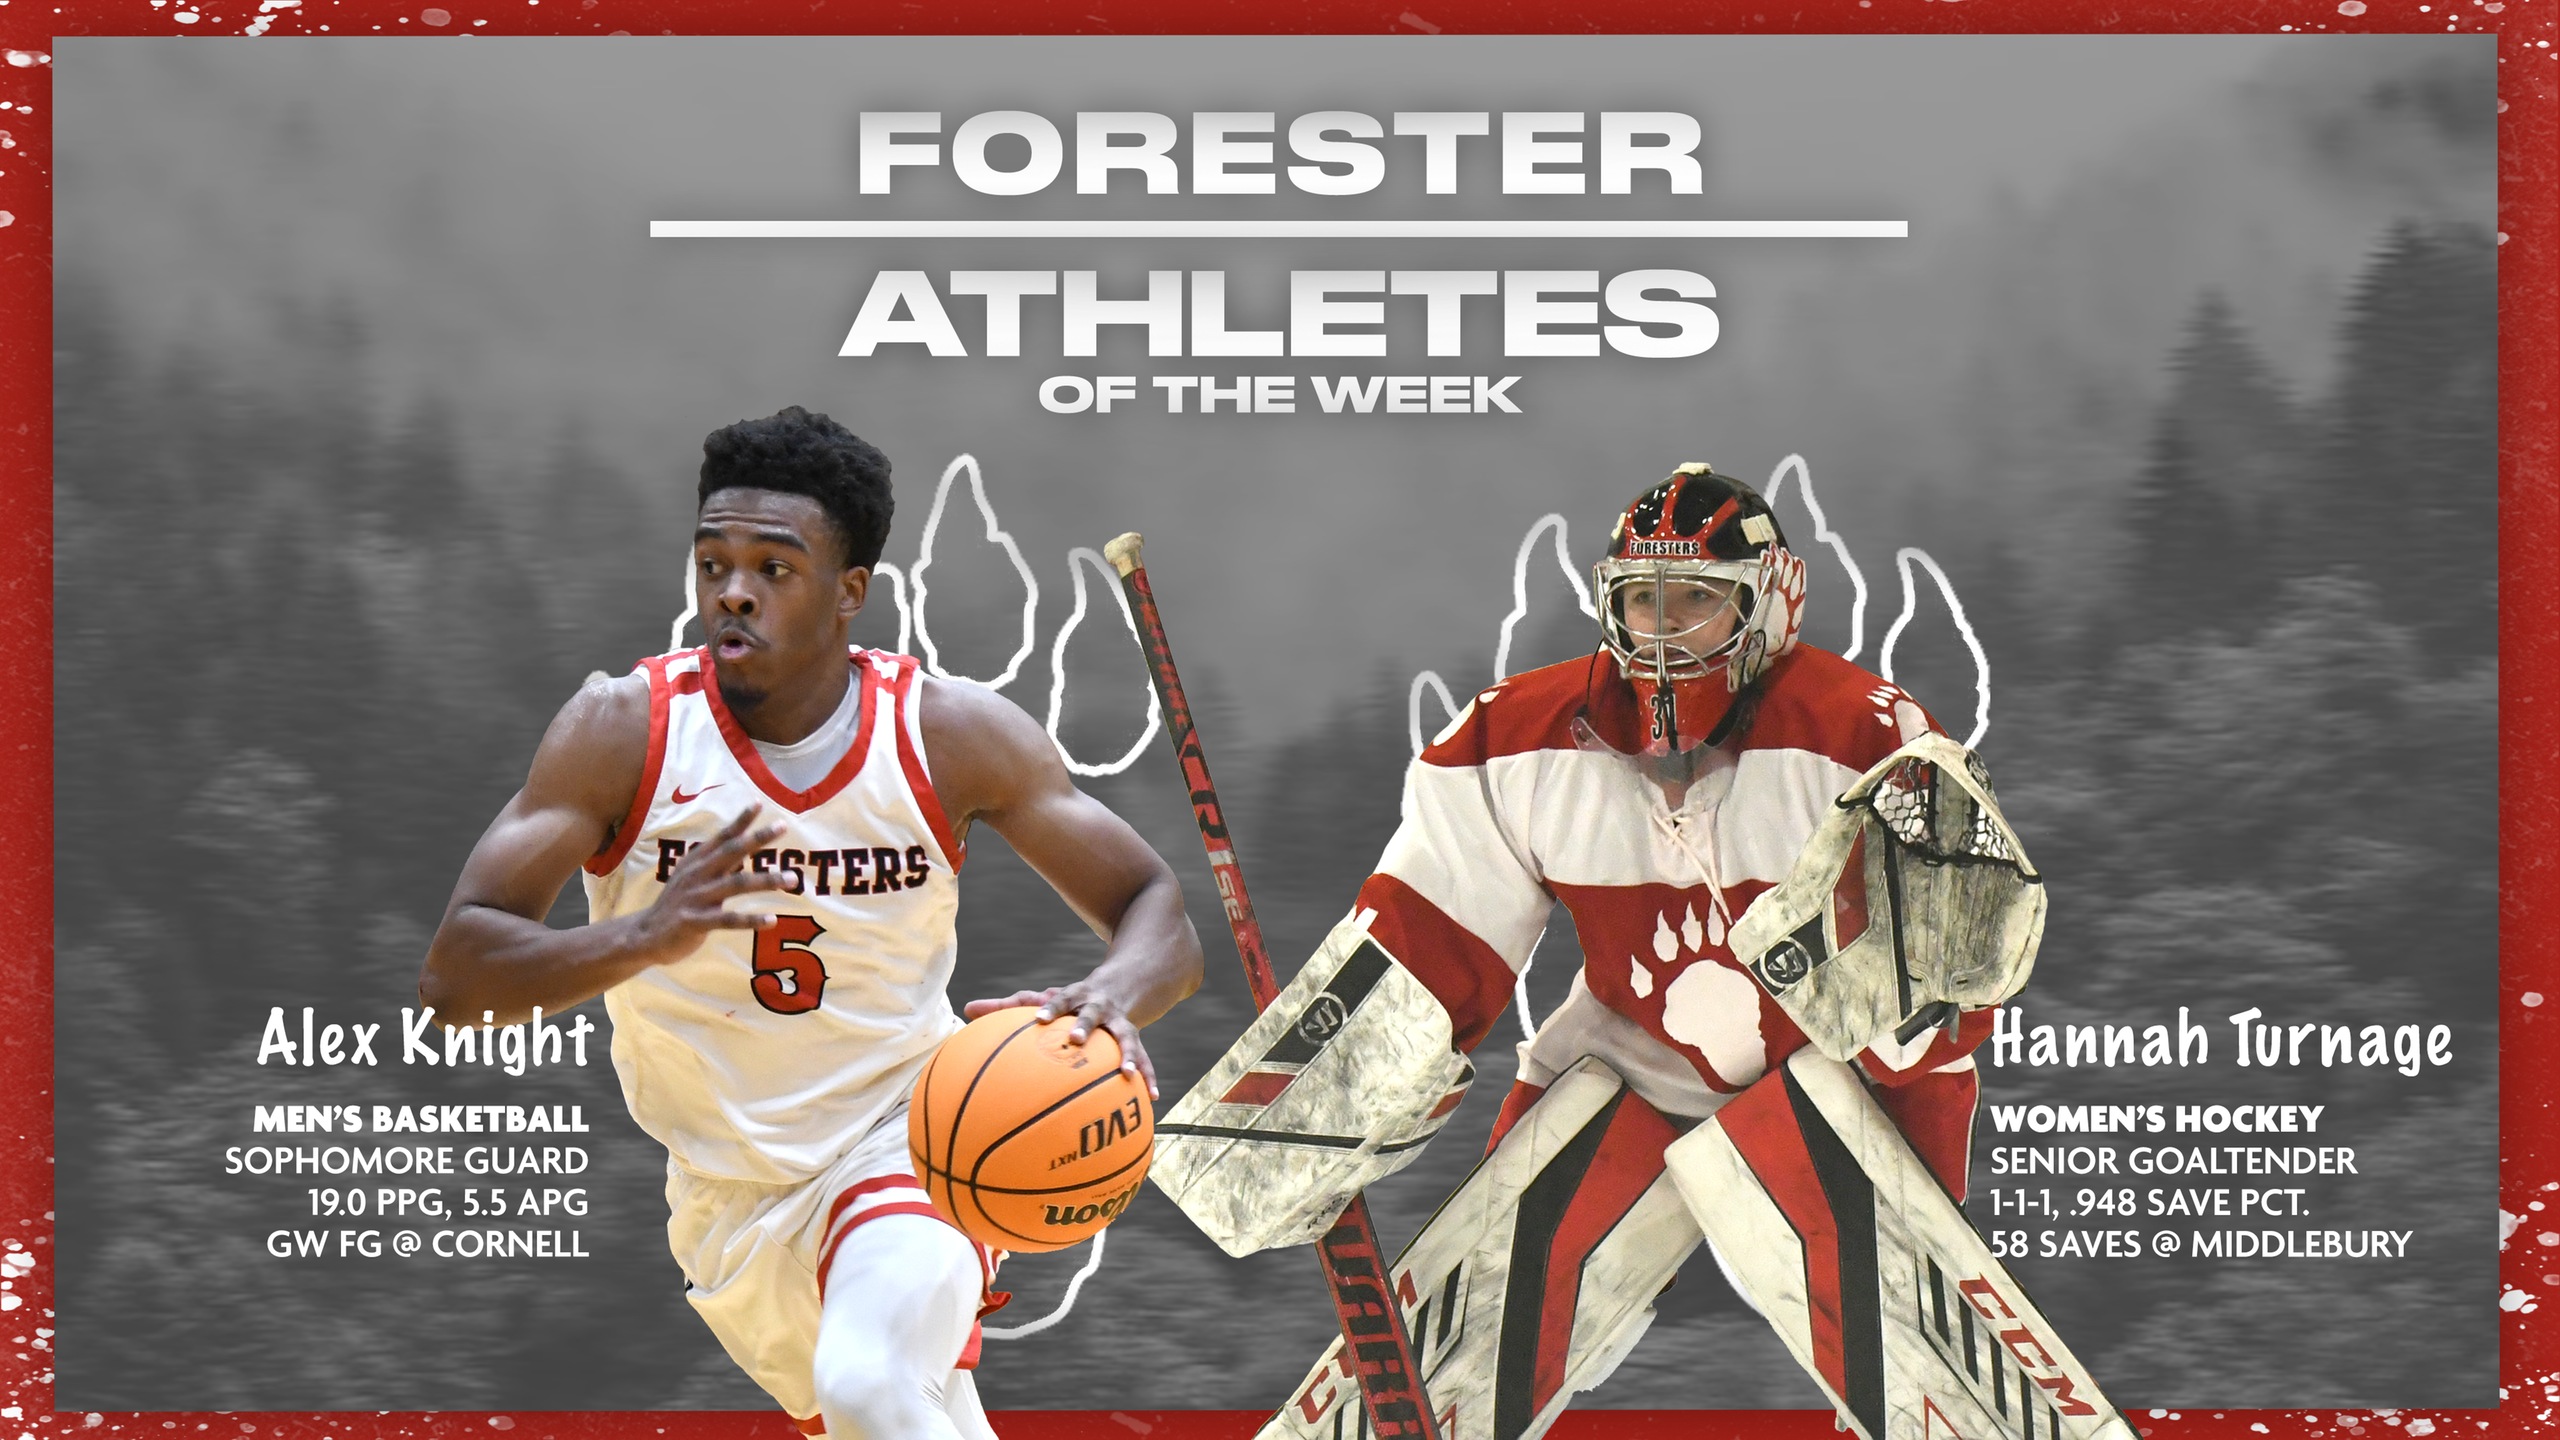 Foresters Athletes of the Week: Jan. 10